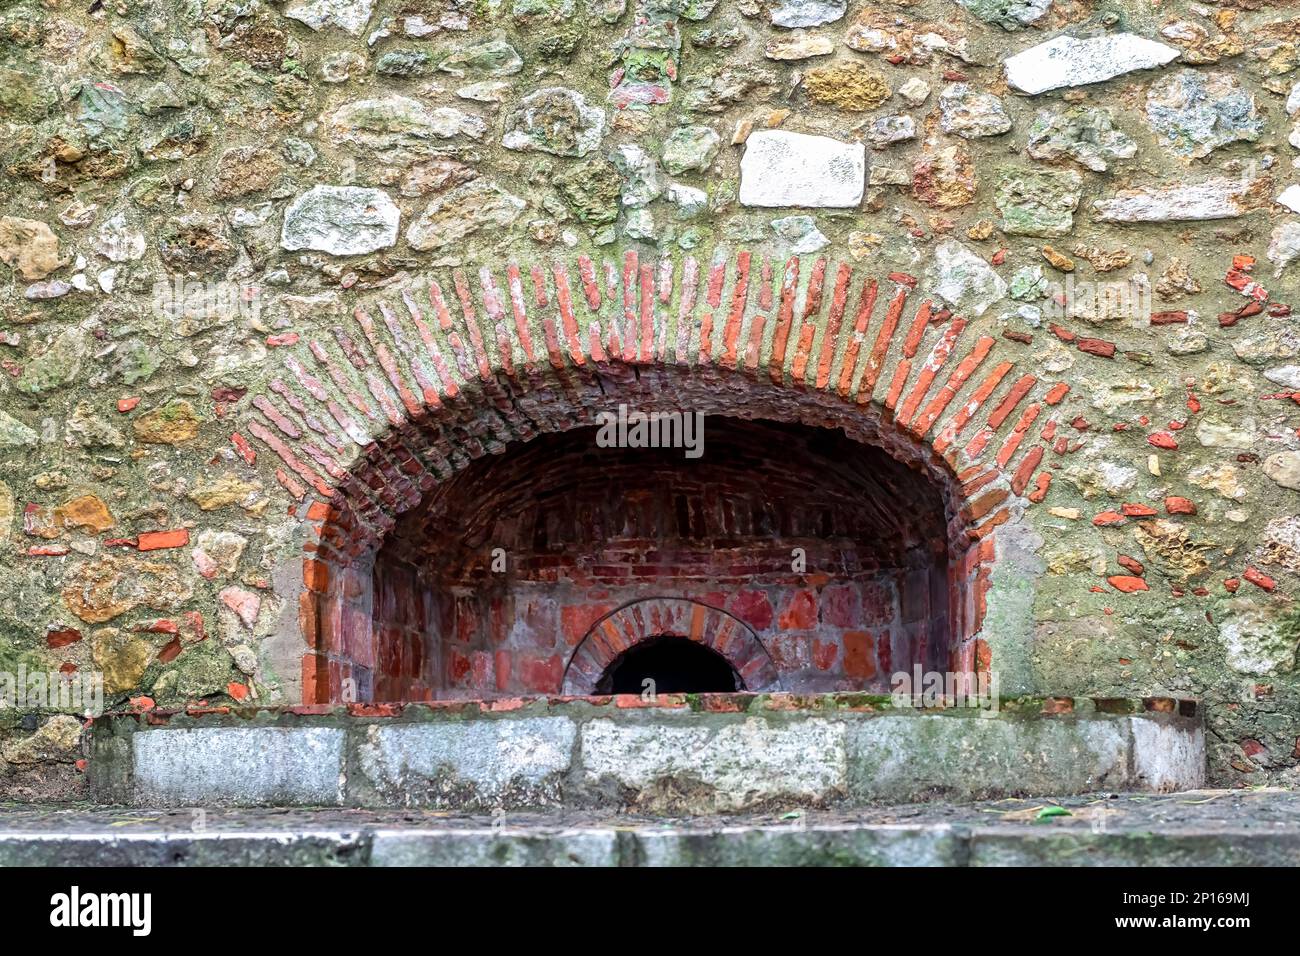 A brick arched structure in the stone wall of the old fortress. Stock Photo